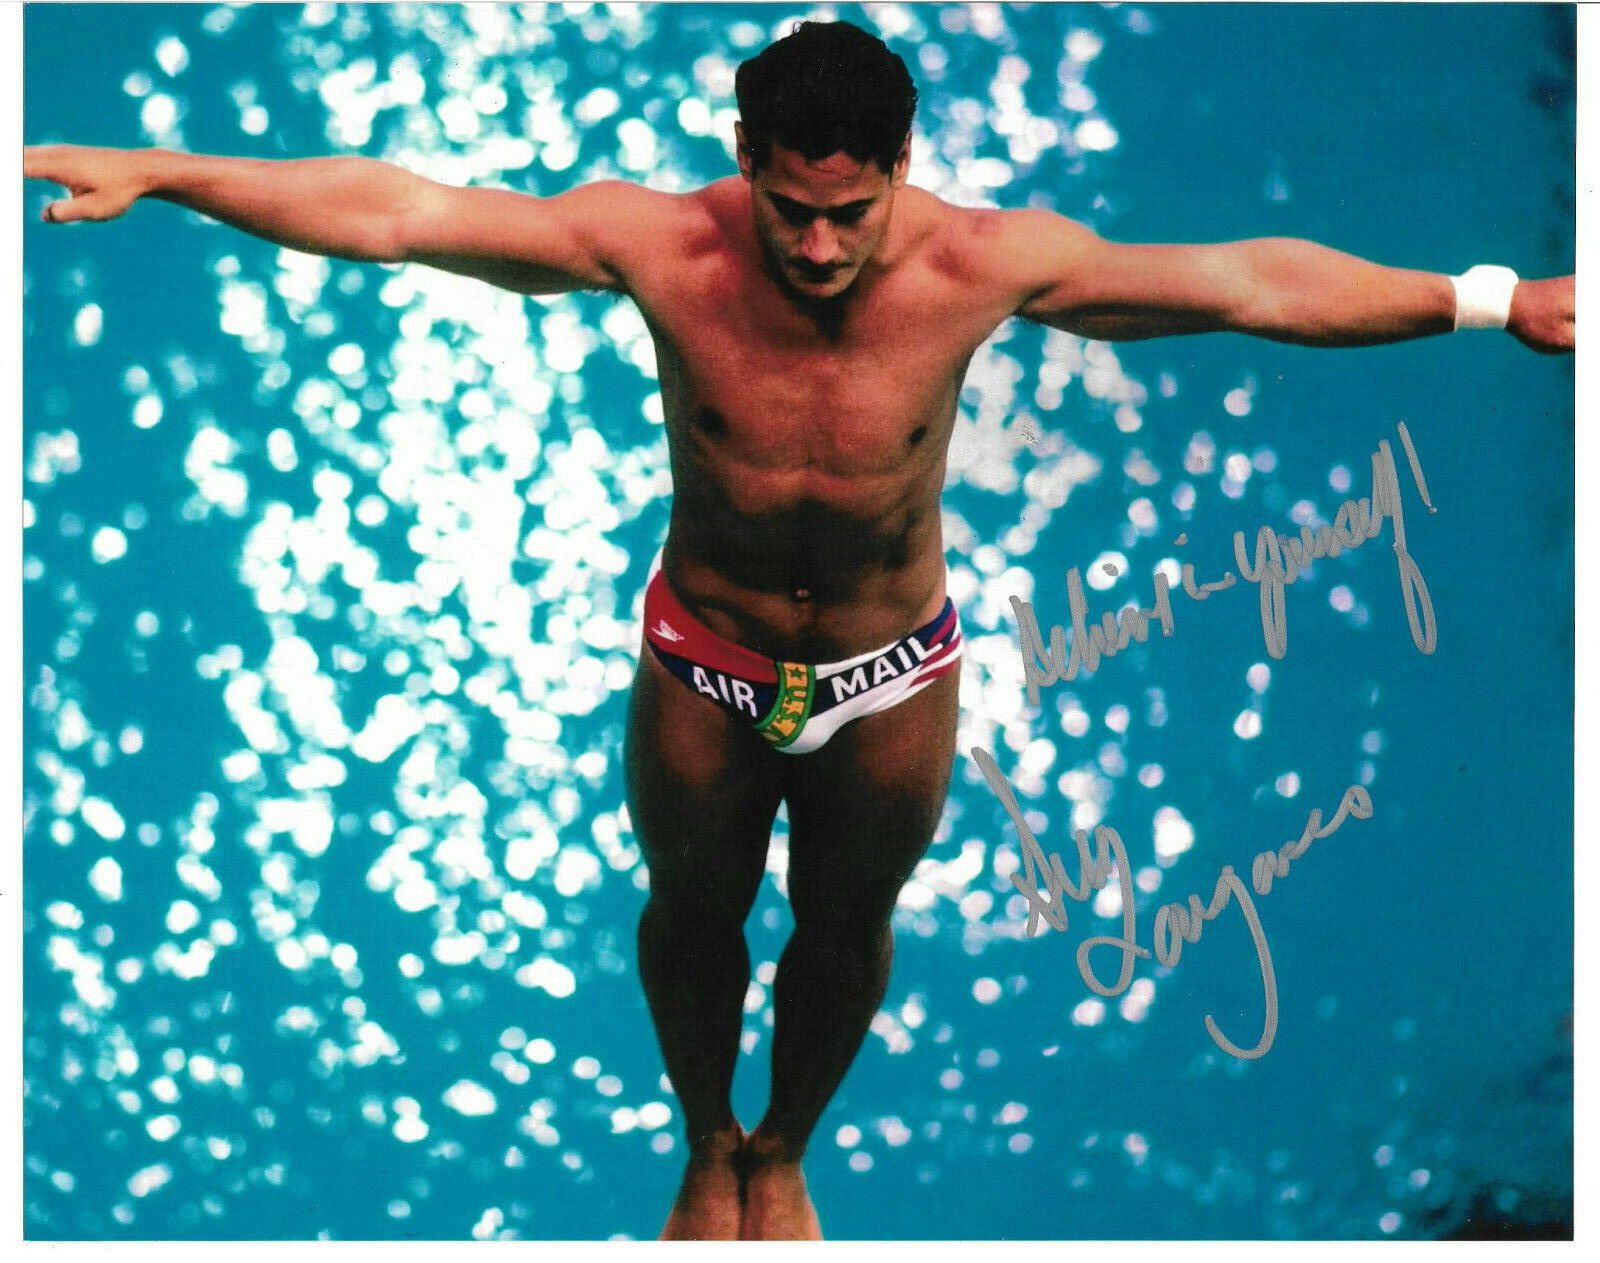 Greg Louganis Authentic Signed 8x10 Photo Poster painting Autographed, Olympics, Diving, Swim